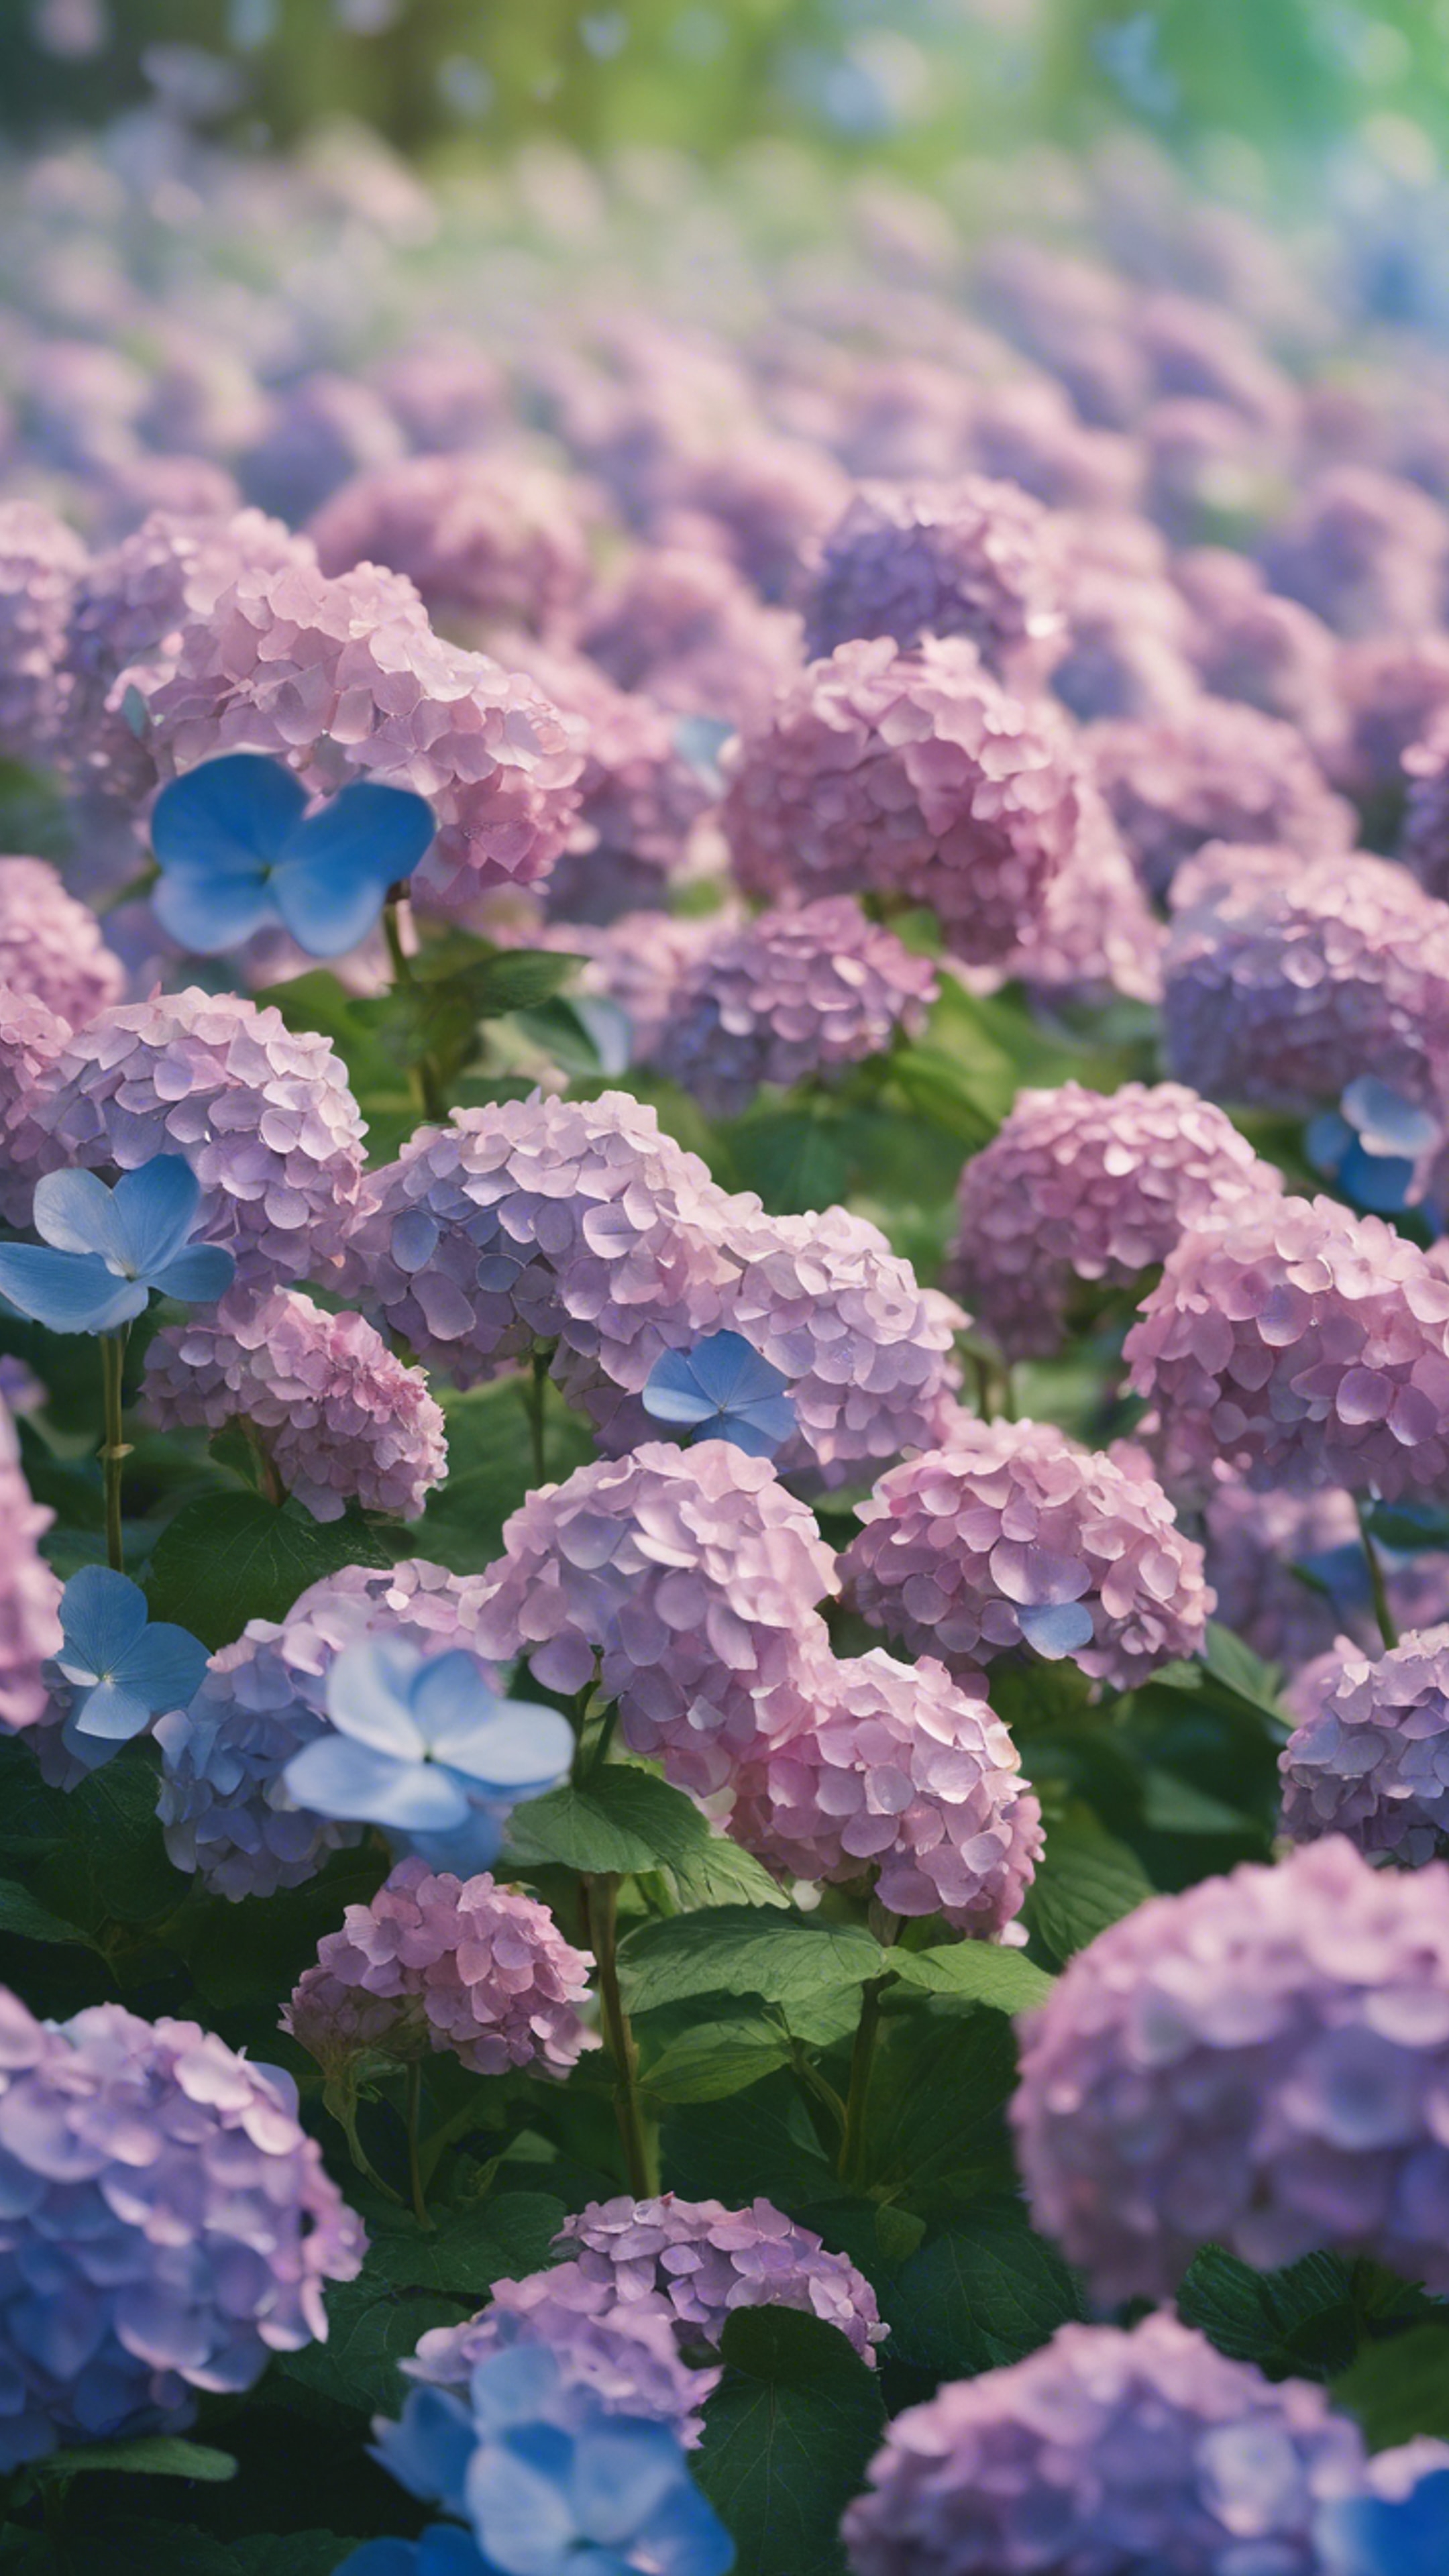 A surreal sky filled with hydrangea clouds raining flower petals onto a green meadow.壁紙[88389e07099e41ce8bb4]